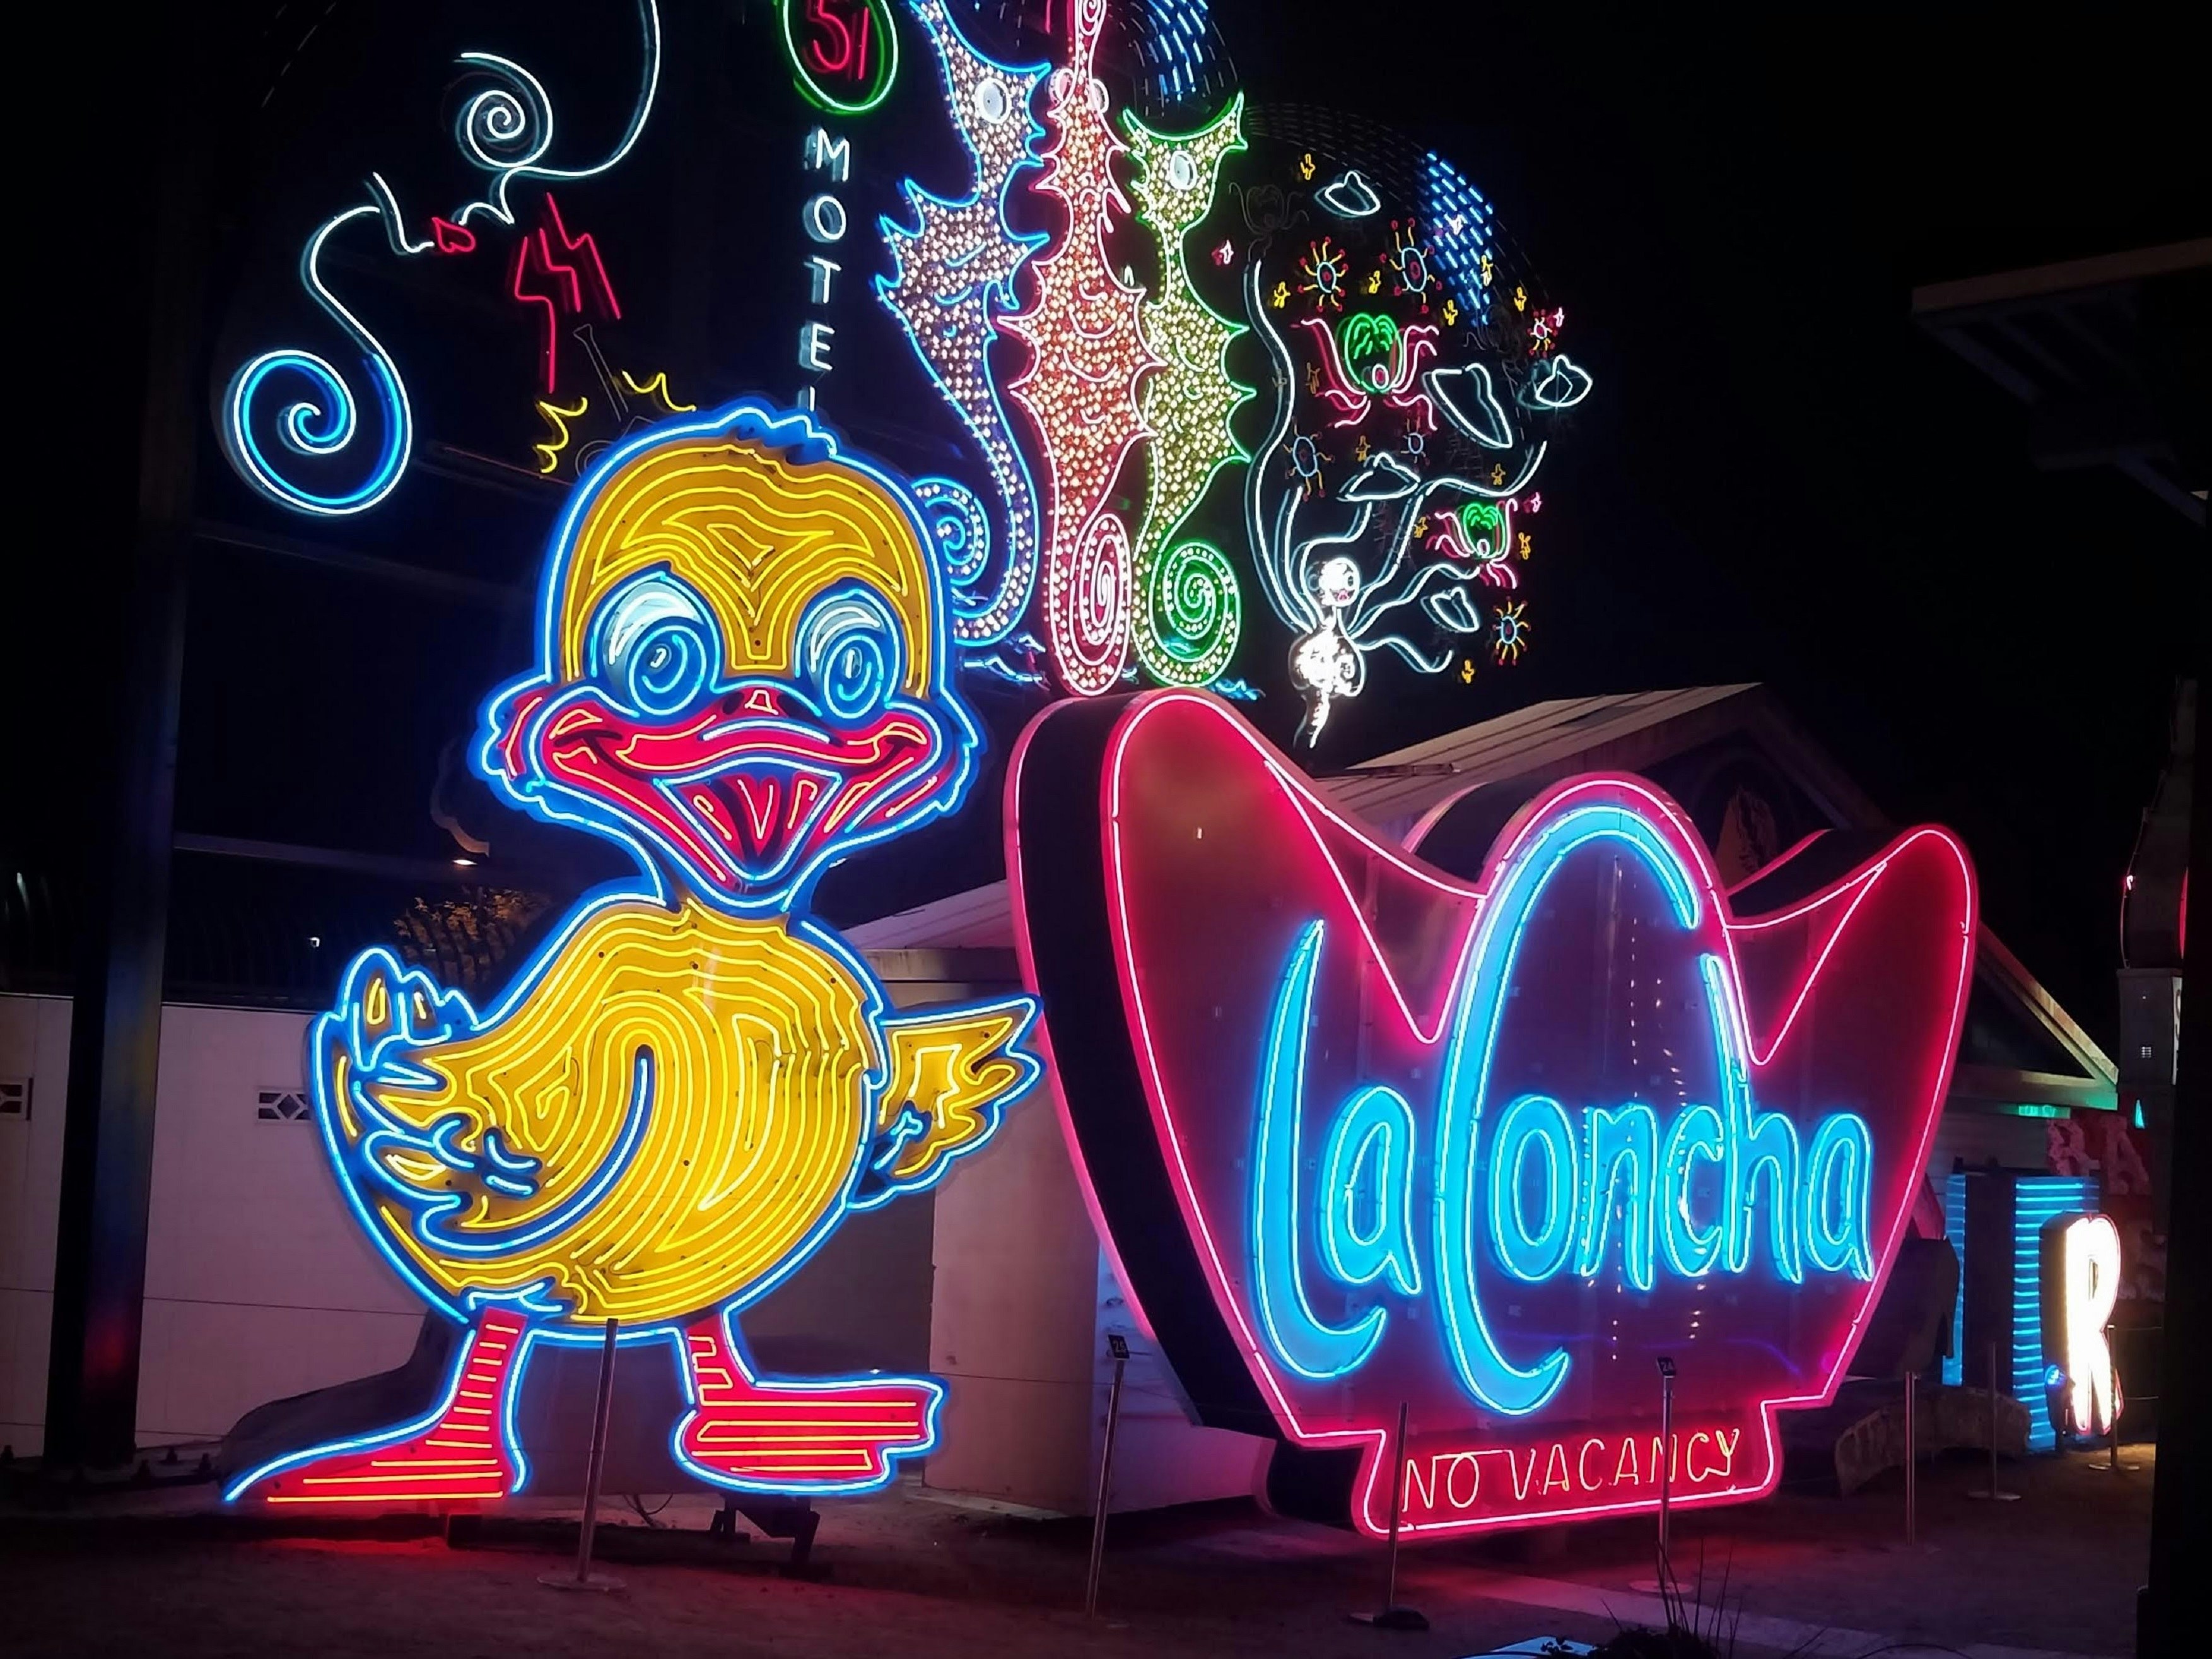 A night-time shot of a collection of neon signs; one is of a yellow duck and the others are colorful motel signs